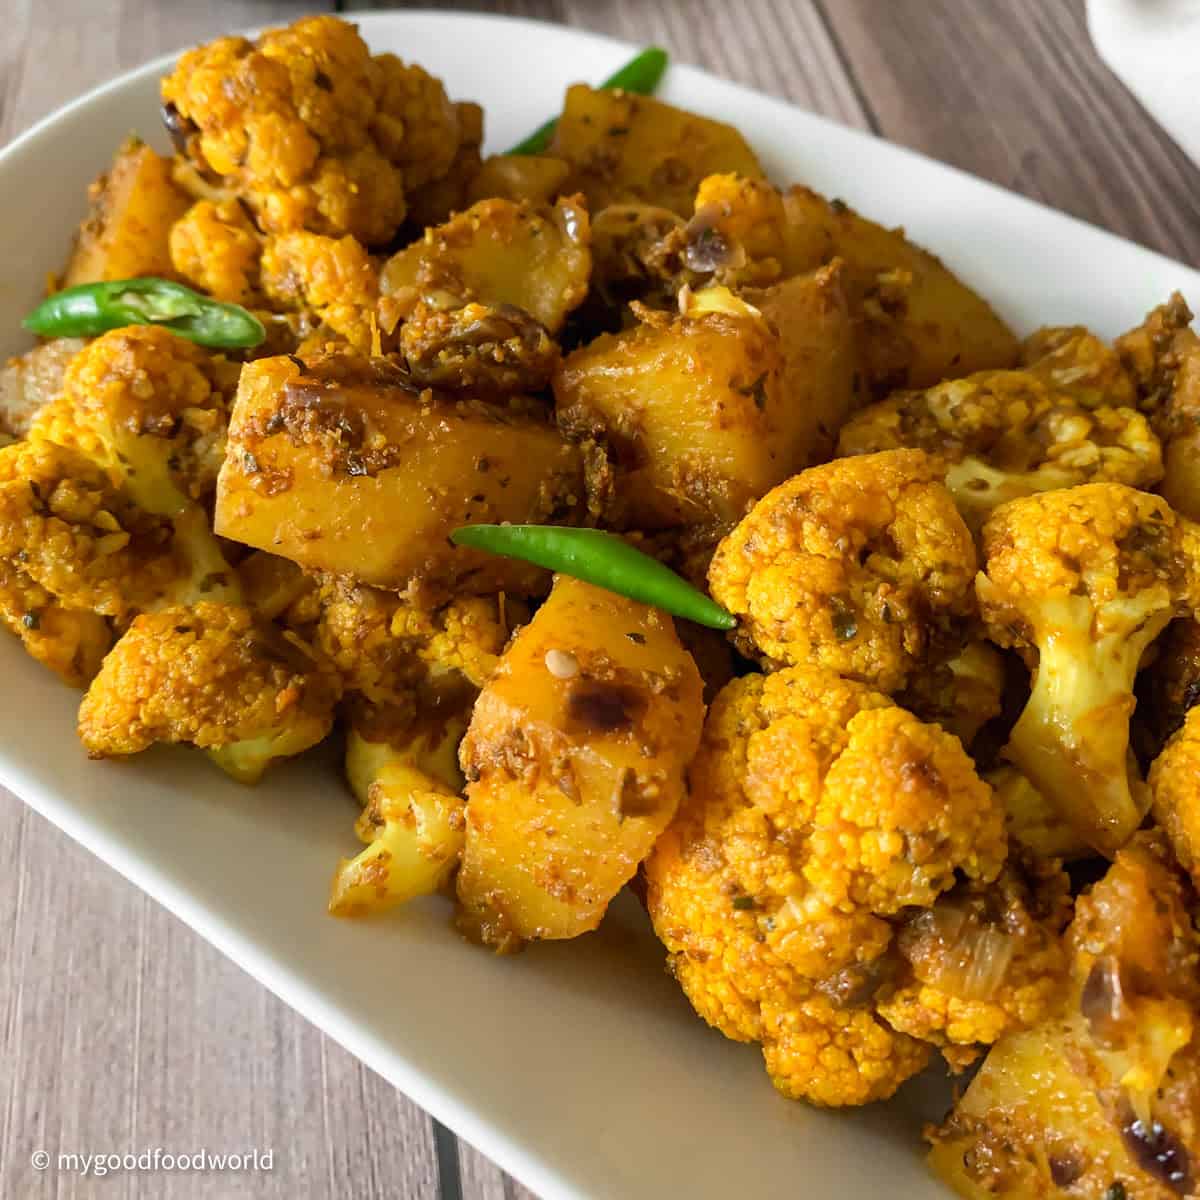 A plate of Indian cauliflower and potato curry on a wooden table.